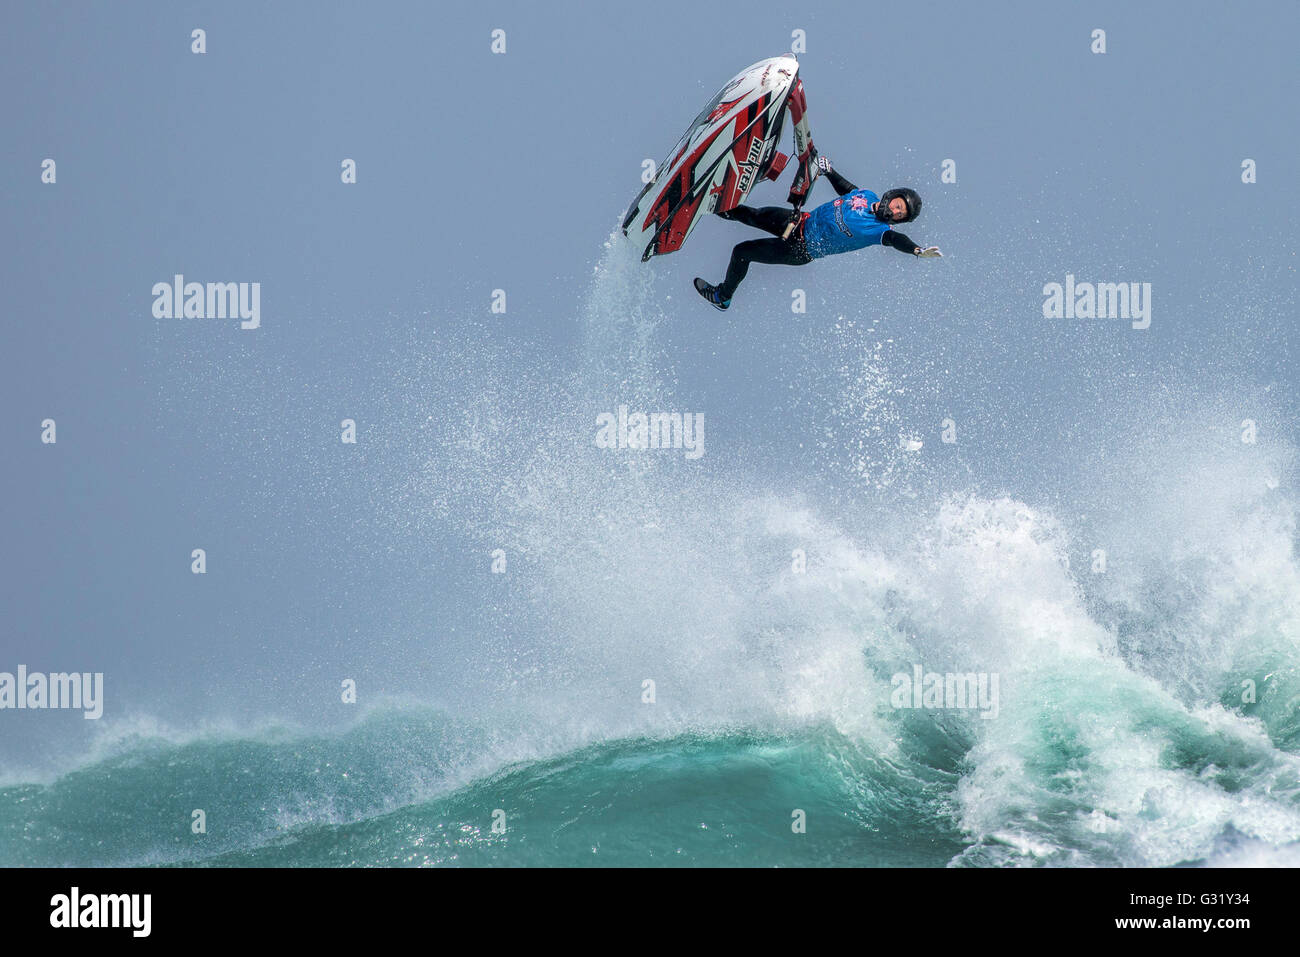 Fistral, Newquay, Cornwall. 6th June, 2016.  Spectacular action as a Jet skier explodes from the waves at the IFWA World Freeride Championships.  Photographer: Gordon Scammell/Alamy Live News. Stock Photo